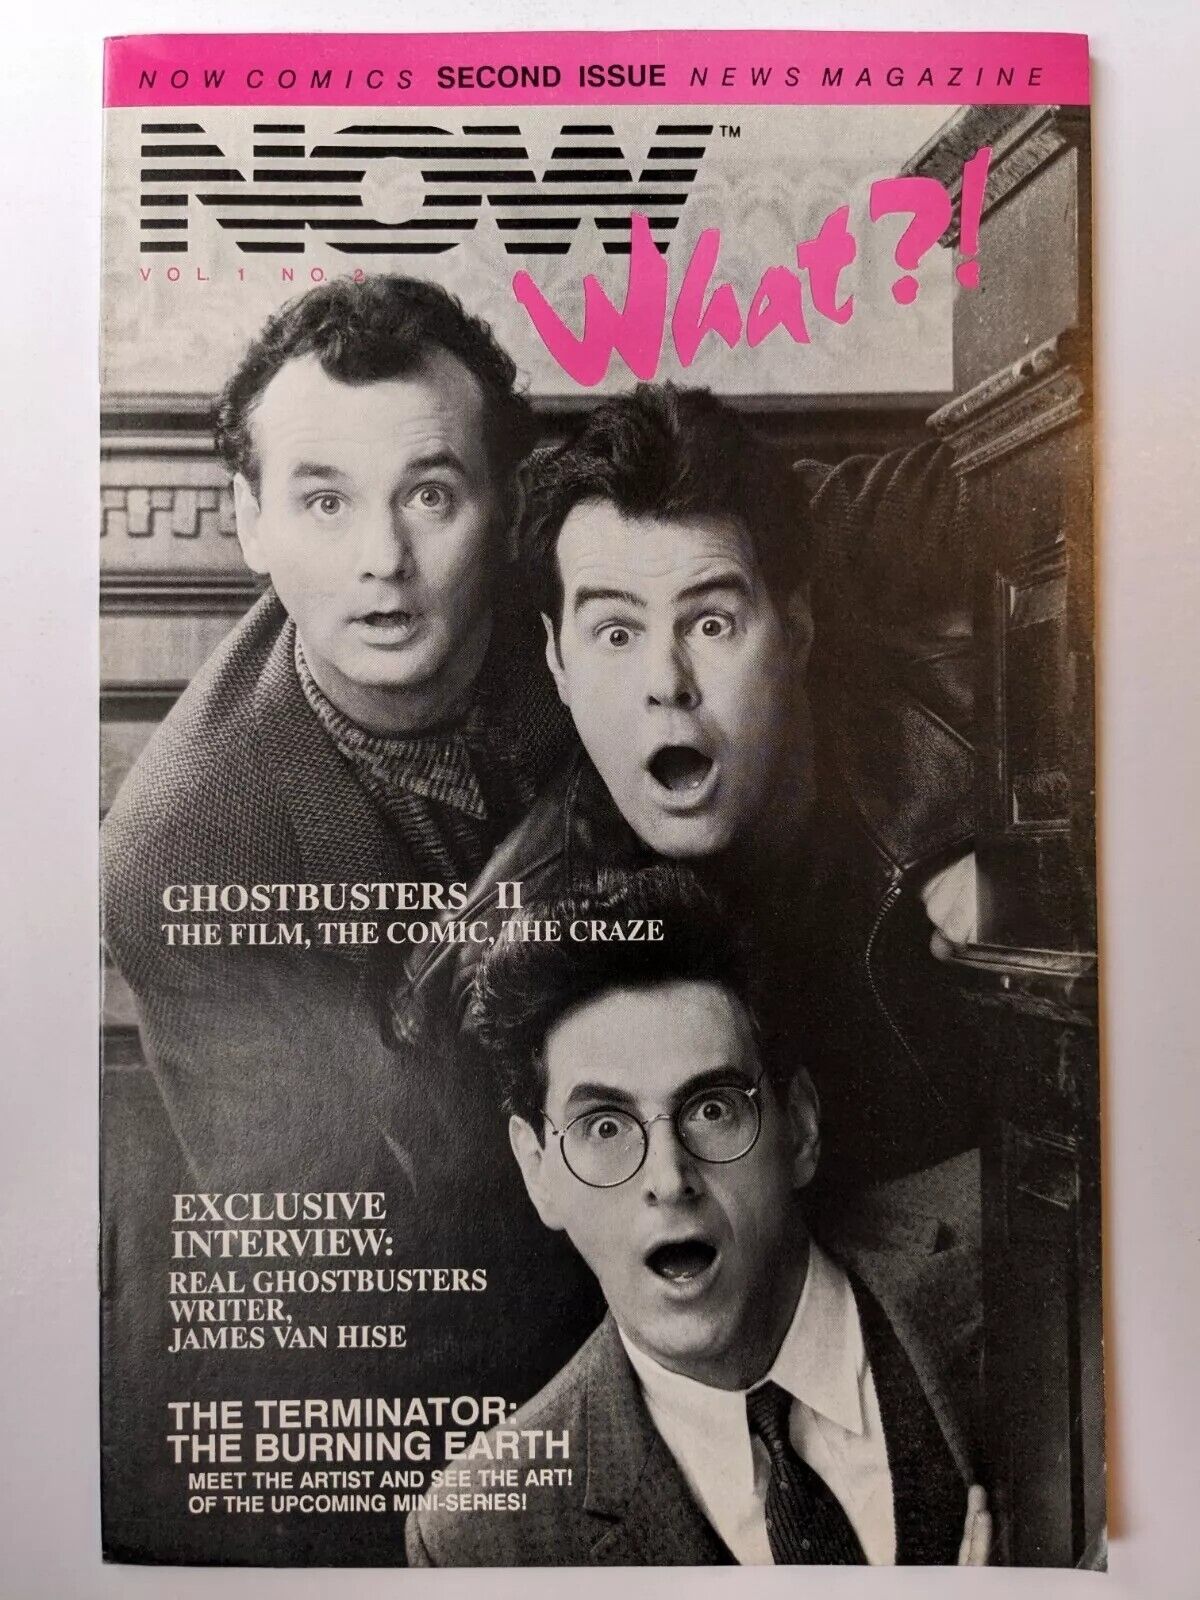 Now What? #2 - Now Comics Newsmagazine - HTF - Real Ghostbusters Photo Cover